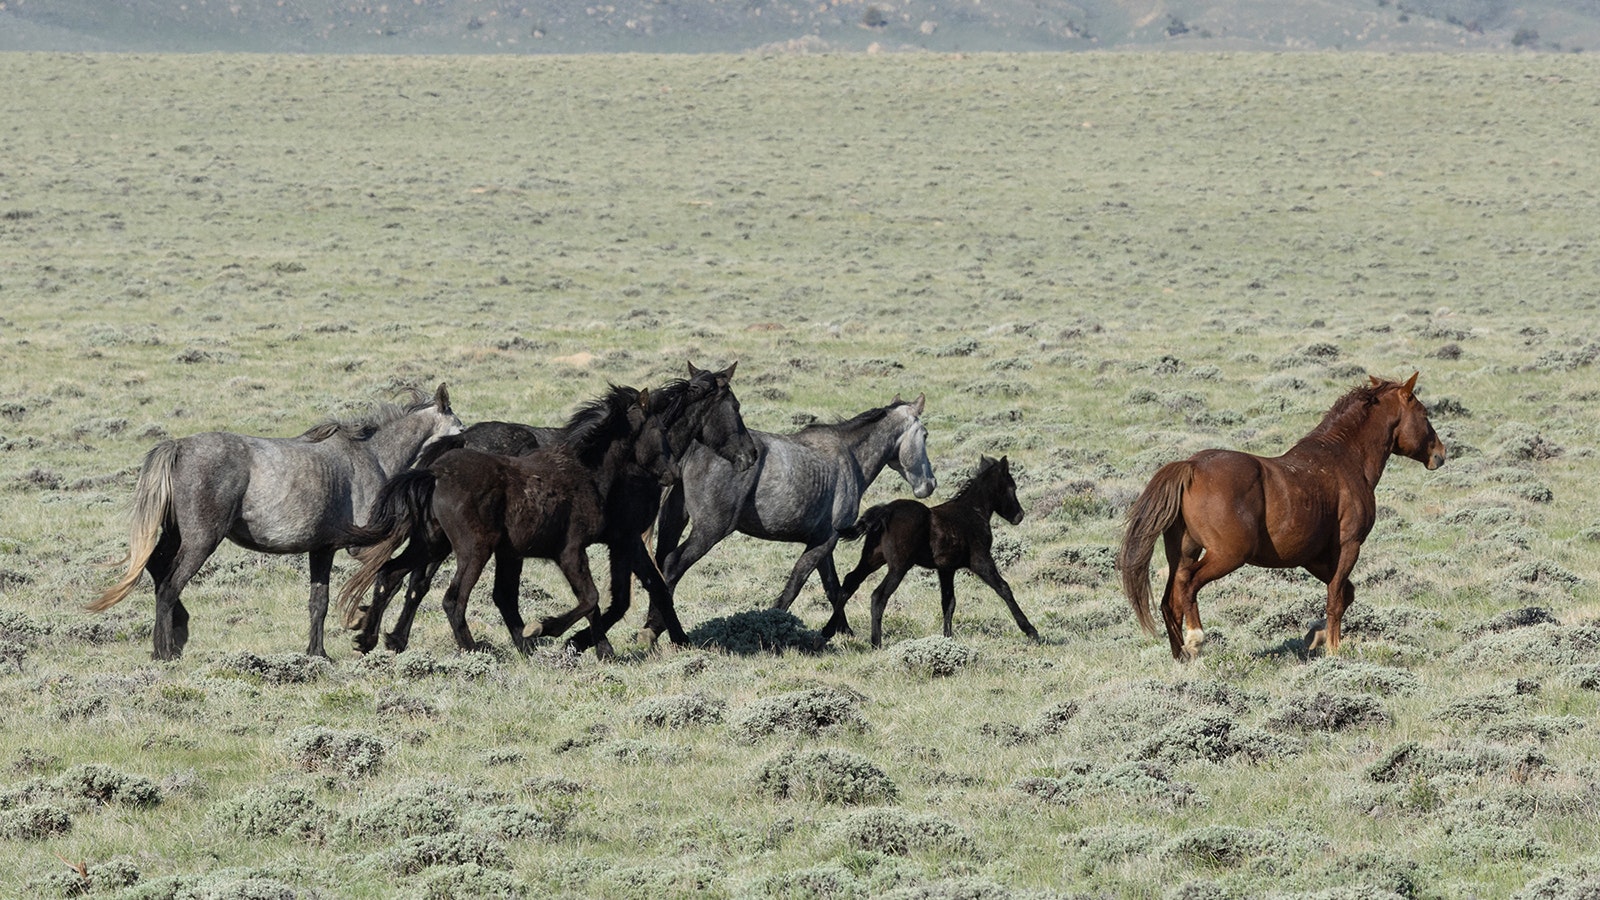 This small band of mustangs are one of numerous such “family groups” that live on the open range in central Wyoming.